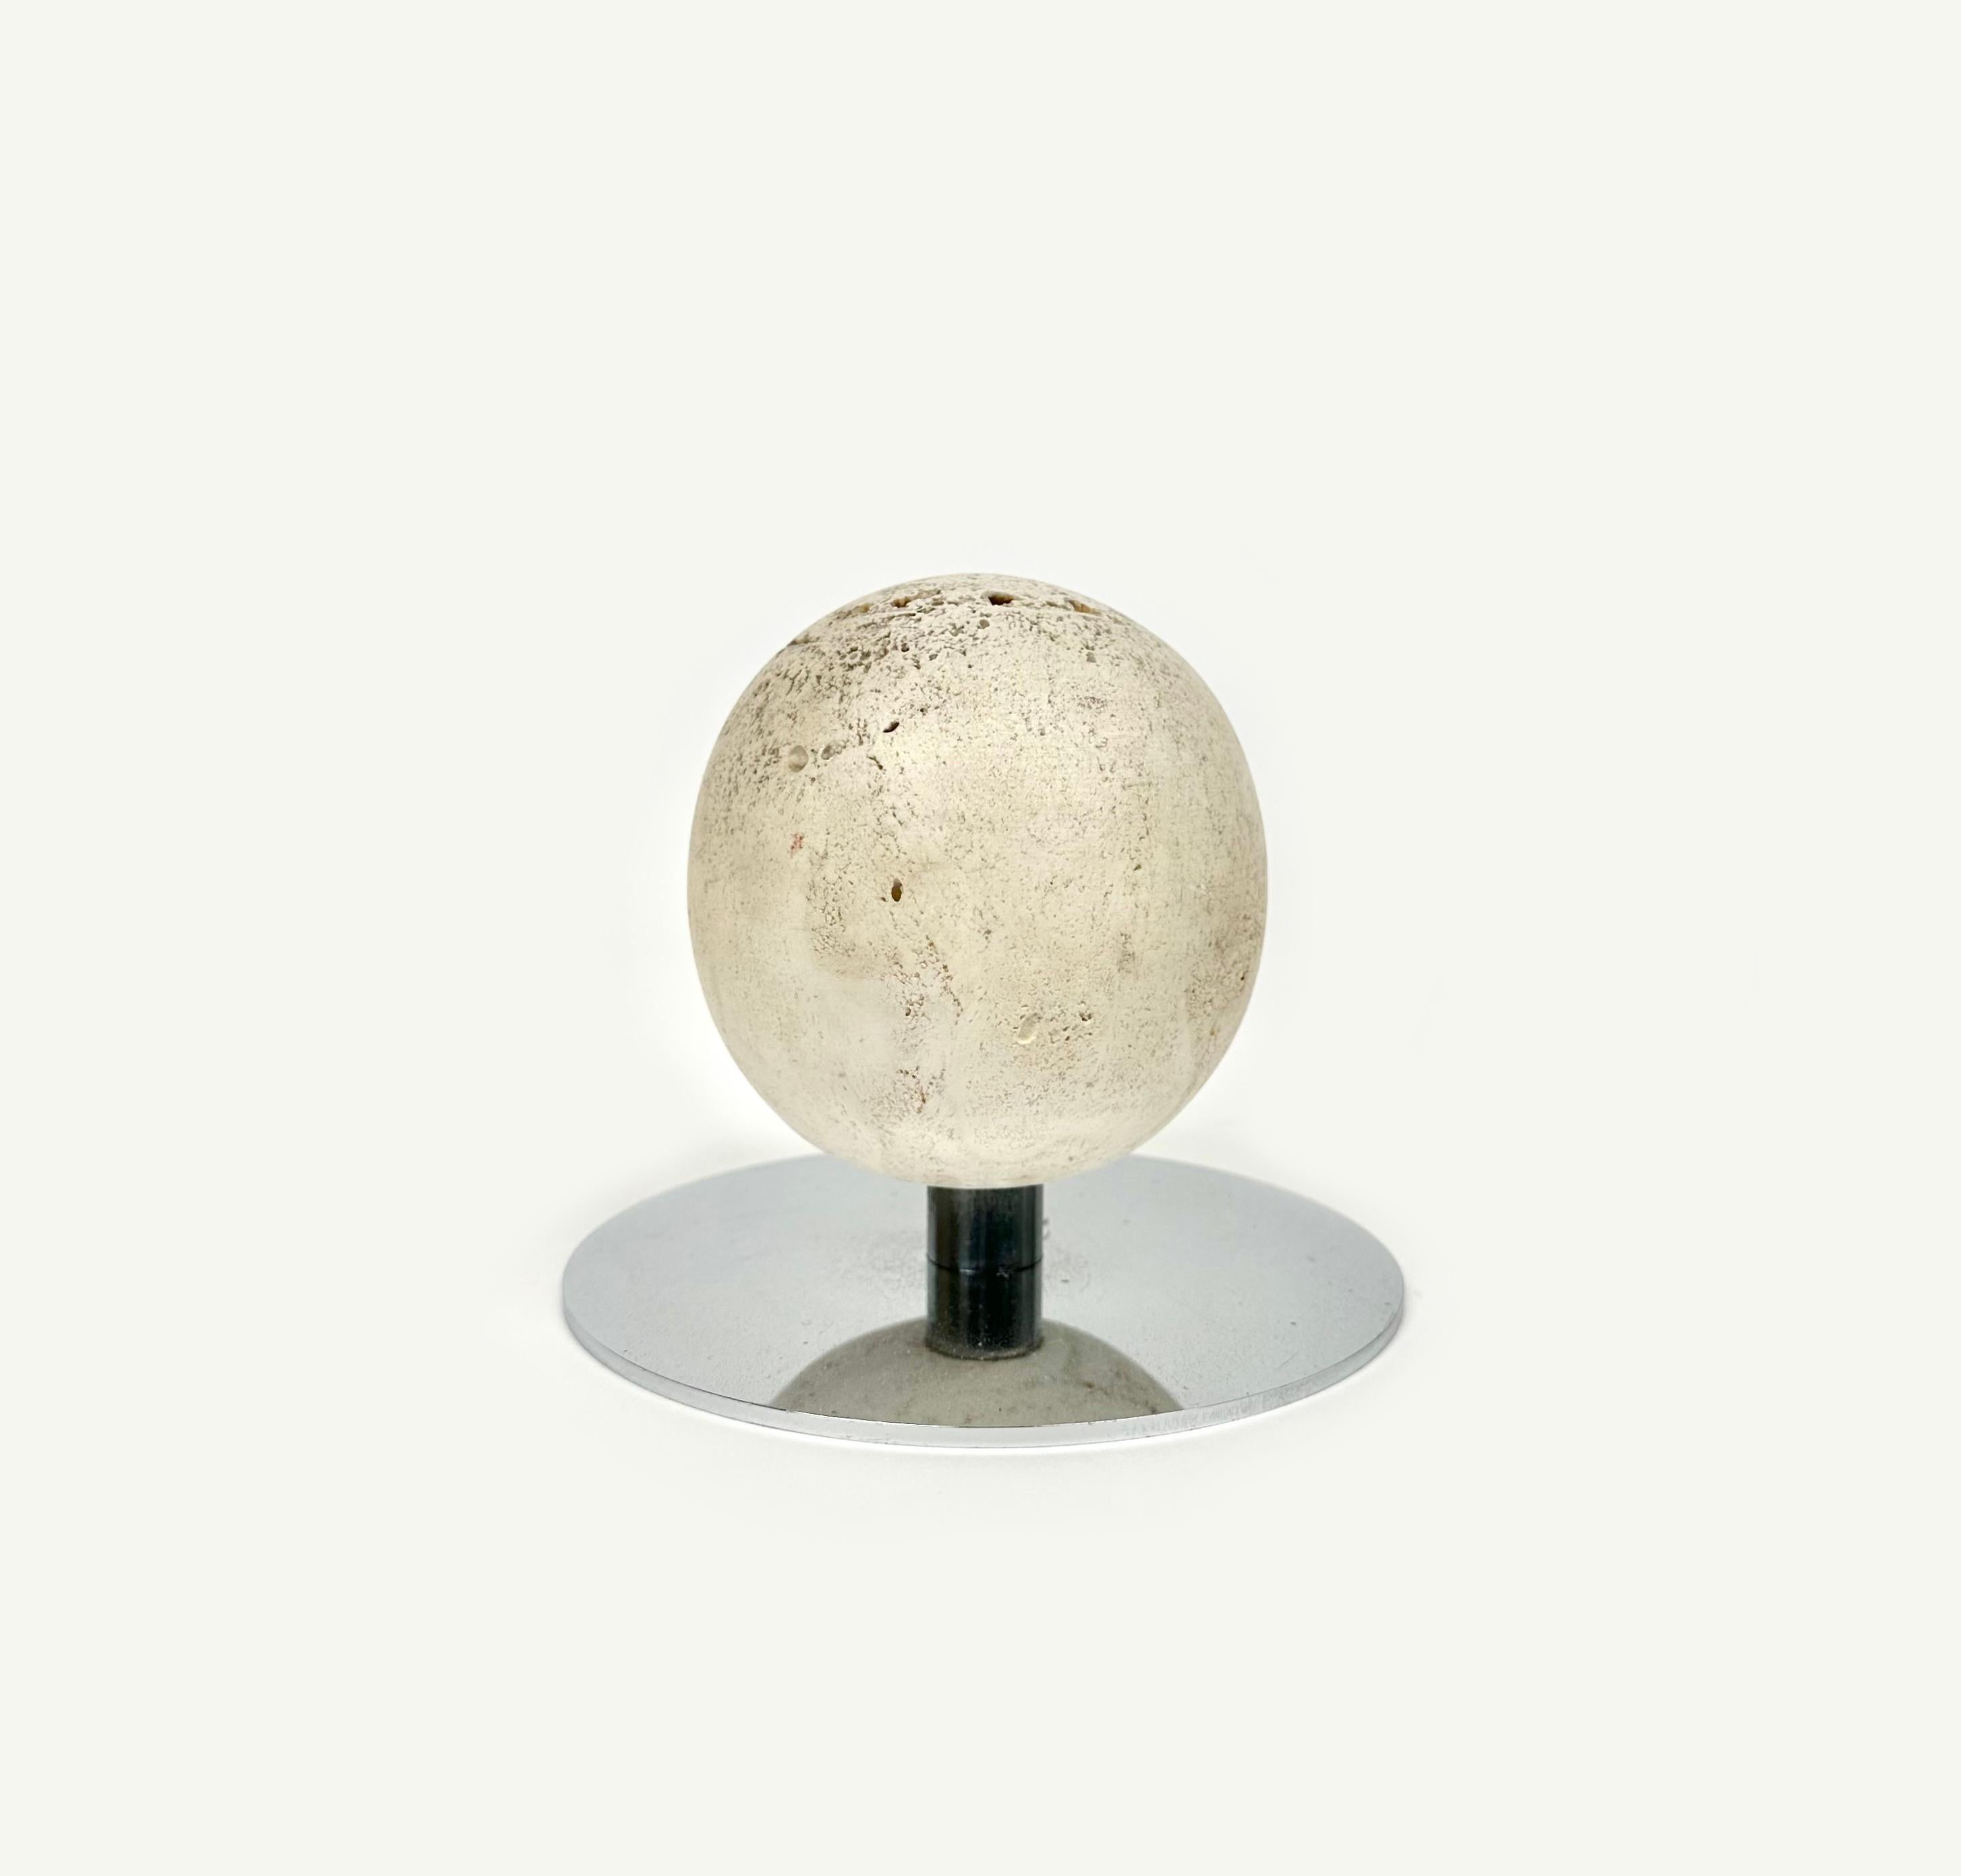 Italian Mid-Century Ball Sculpture Paperweight in Steel and Travertine, Italy, 1970s For Sale